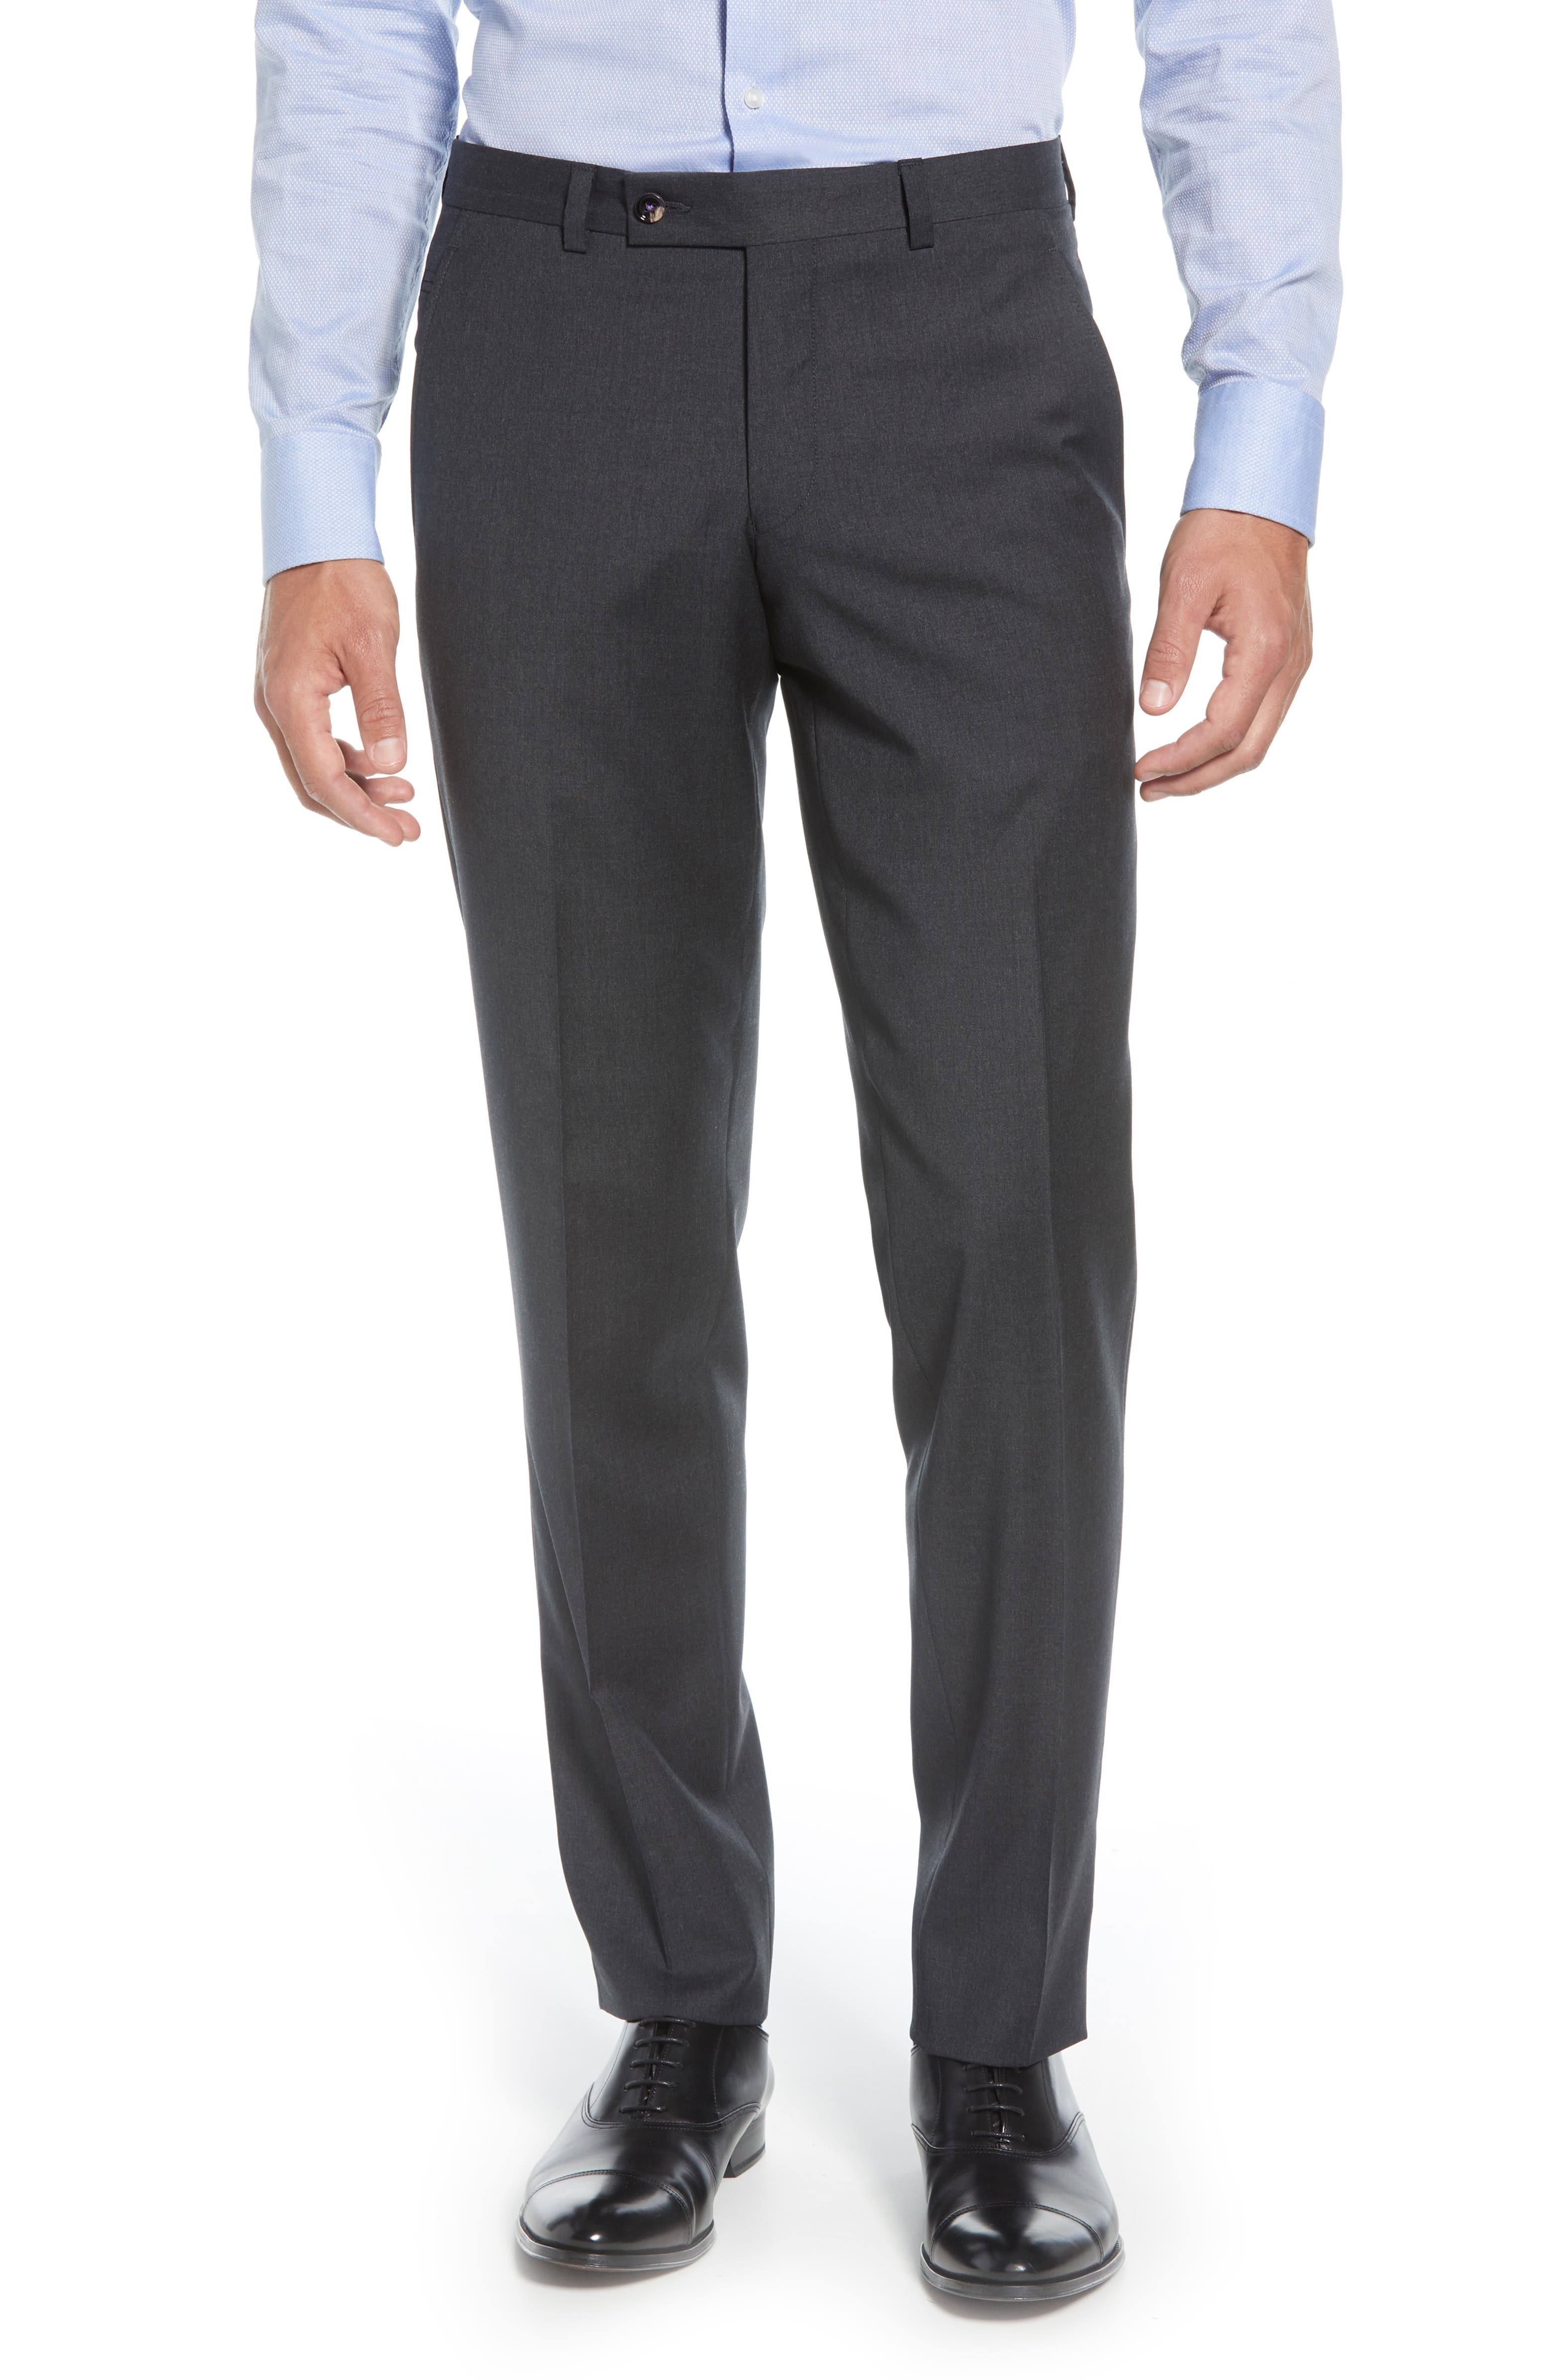 Ted Baker London Jerome Flat Front Solid Wool Dress Pants | Nordstrom